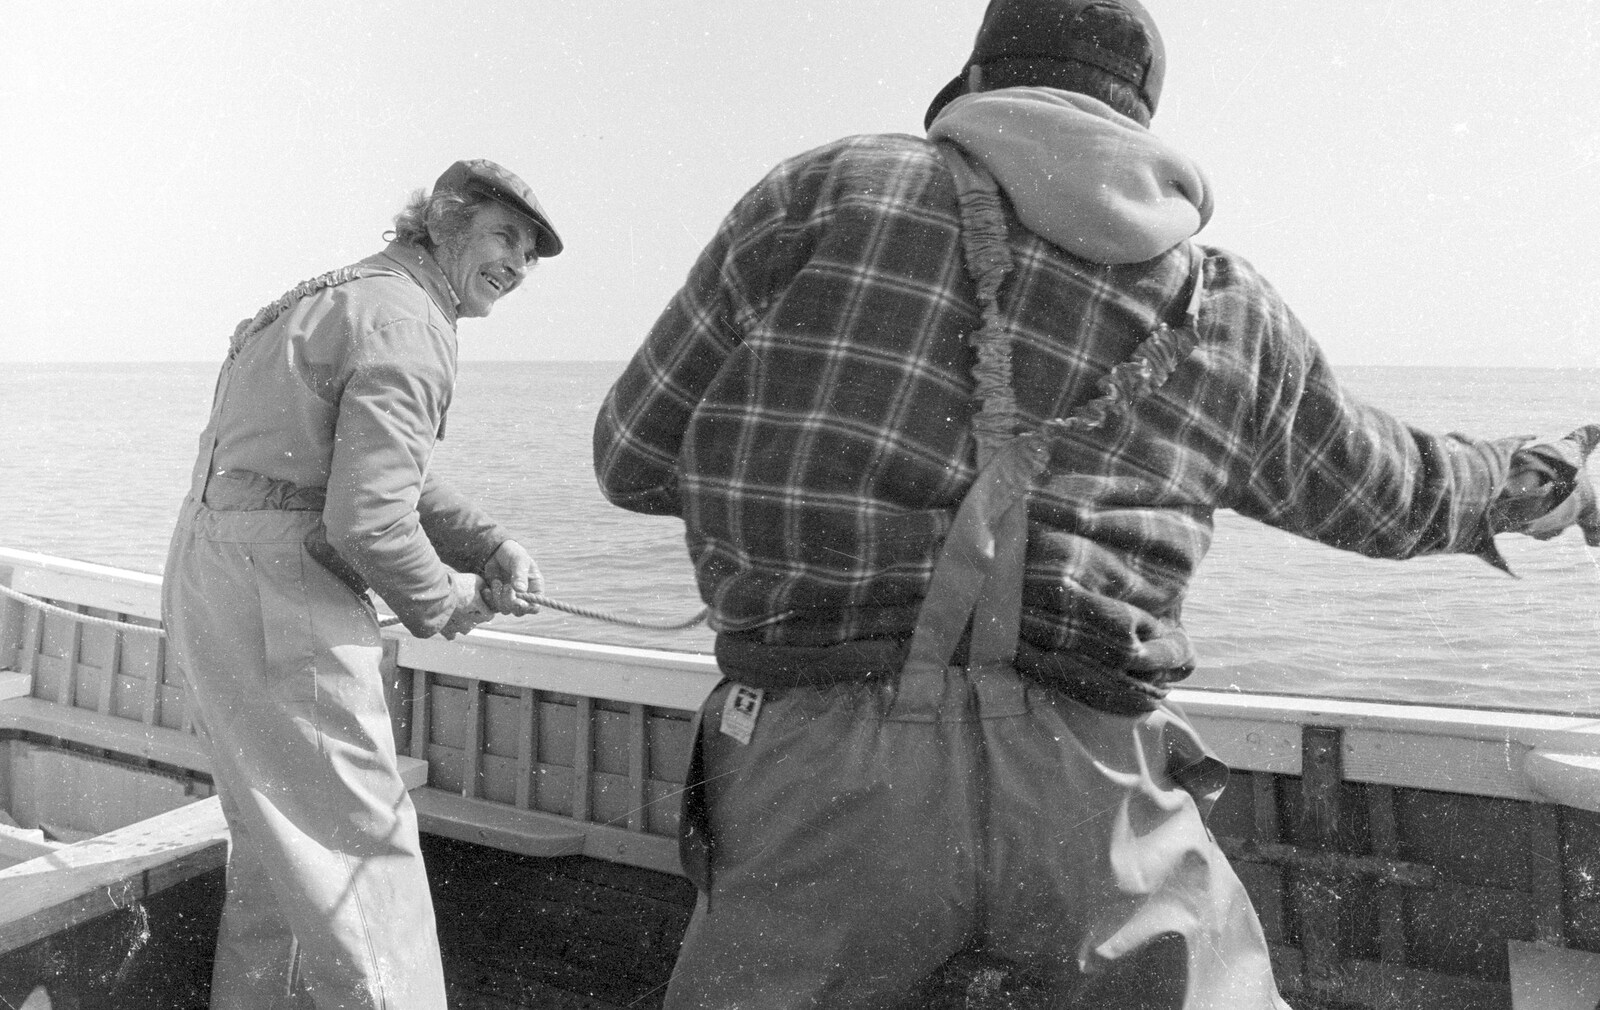 Peter and Ben from A Fishing Trip on the Linda M, Southwold, Suffolk - 25th April 1993